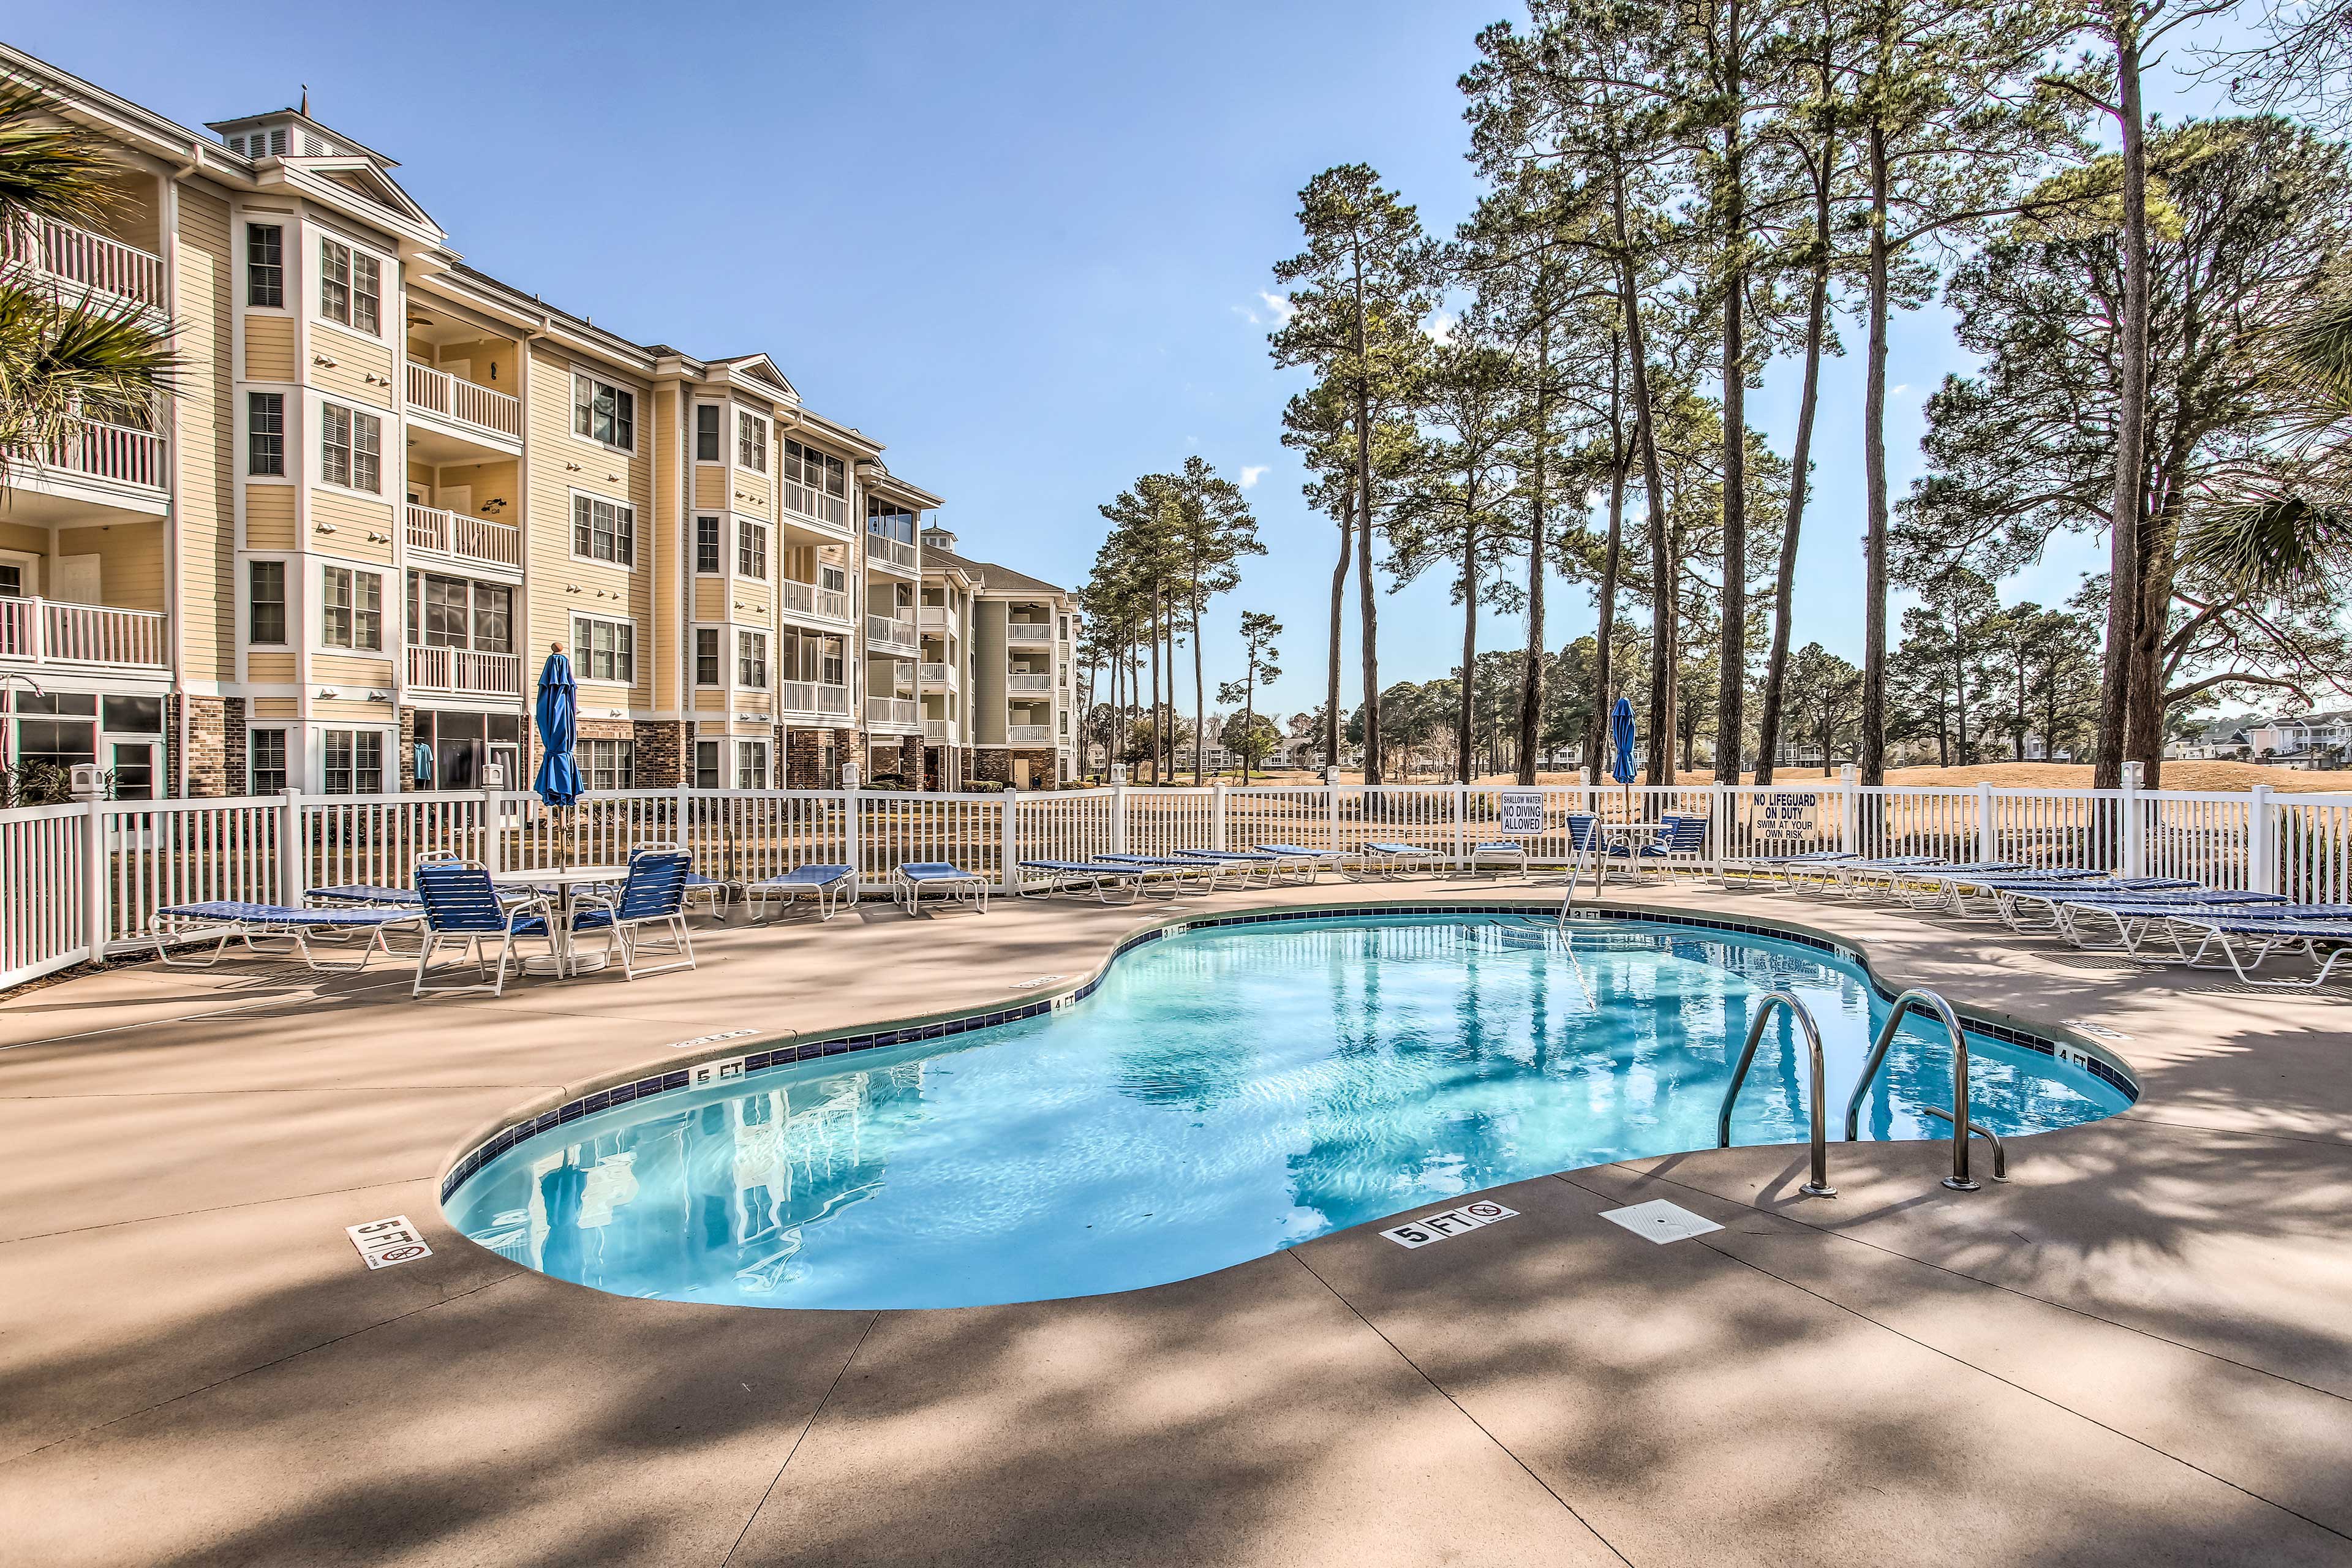 Myrtle Beach Vacation Rental | 3BR | 2BA | Step-Free Access | 1,300 Sq Ft